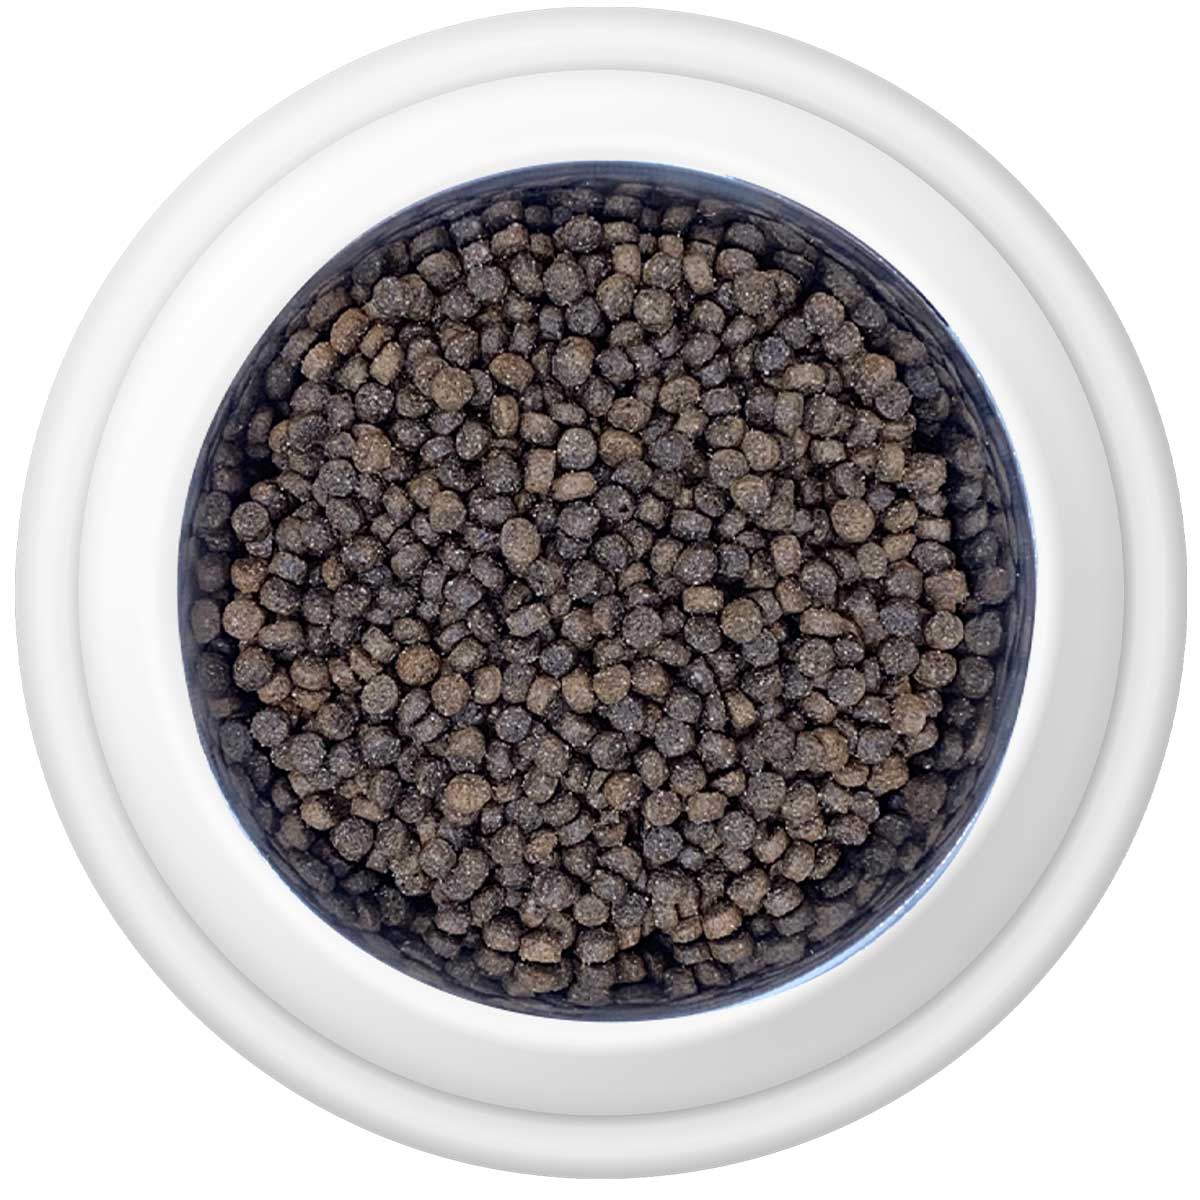 Country Pursuit Premium Puppy Food in a bowl